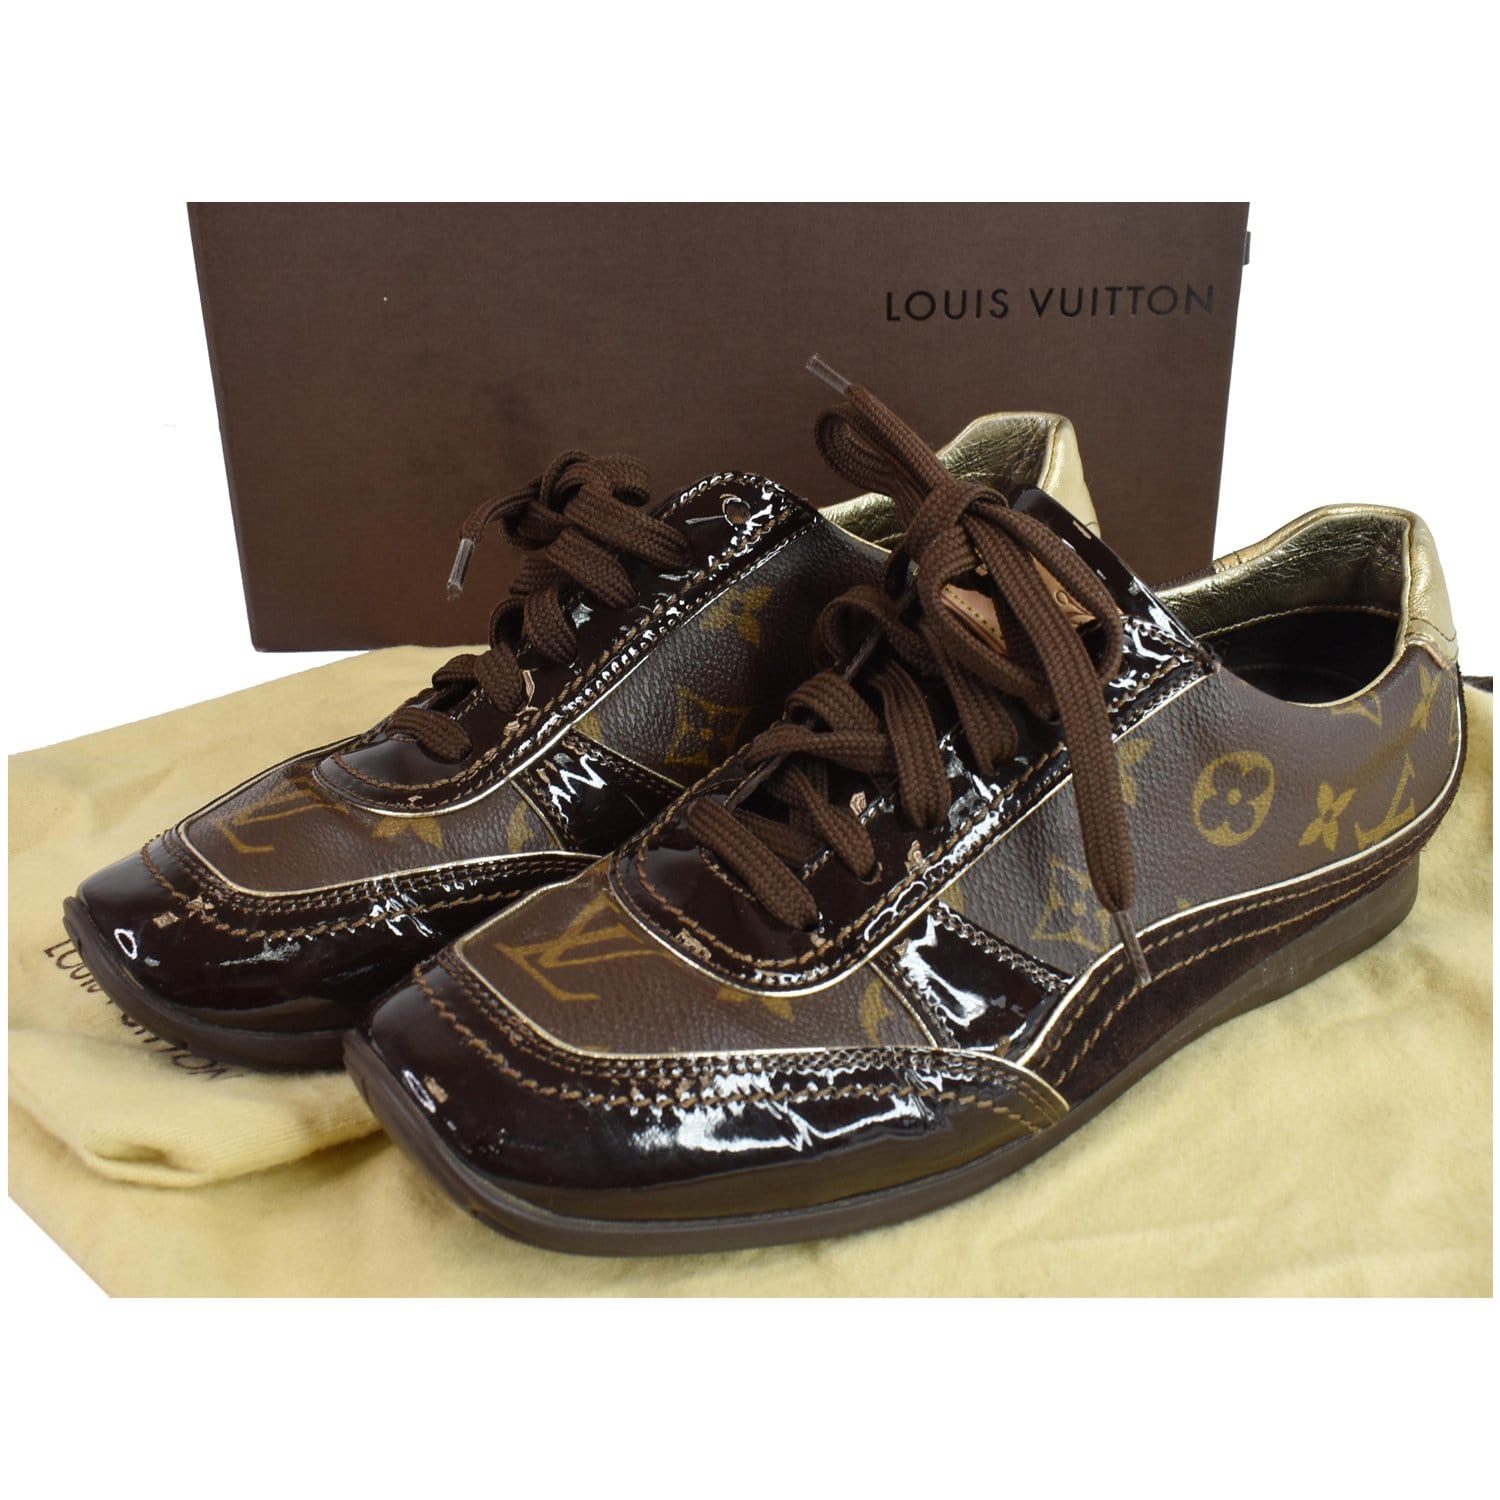 Louis Vuitton Monogram Mens Shoes - 8 For Sale on 1stDibs